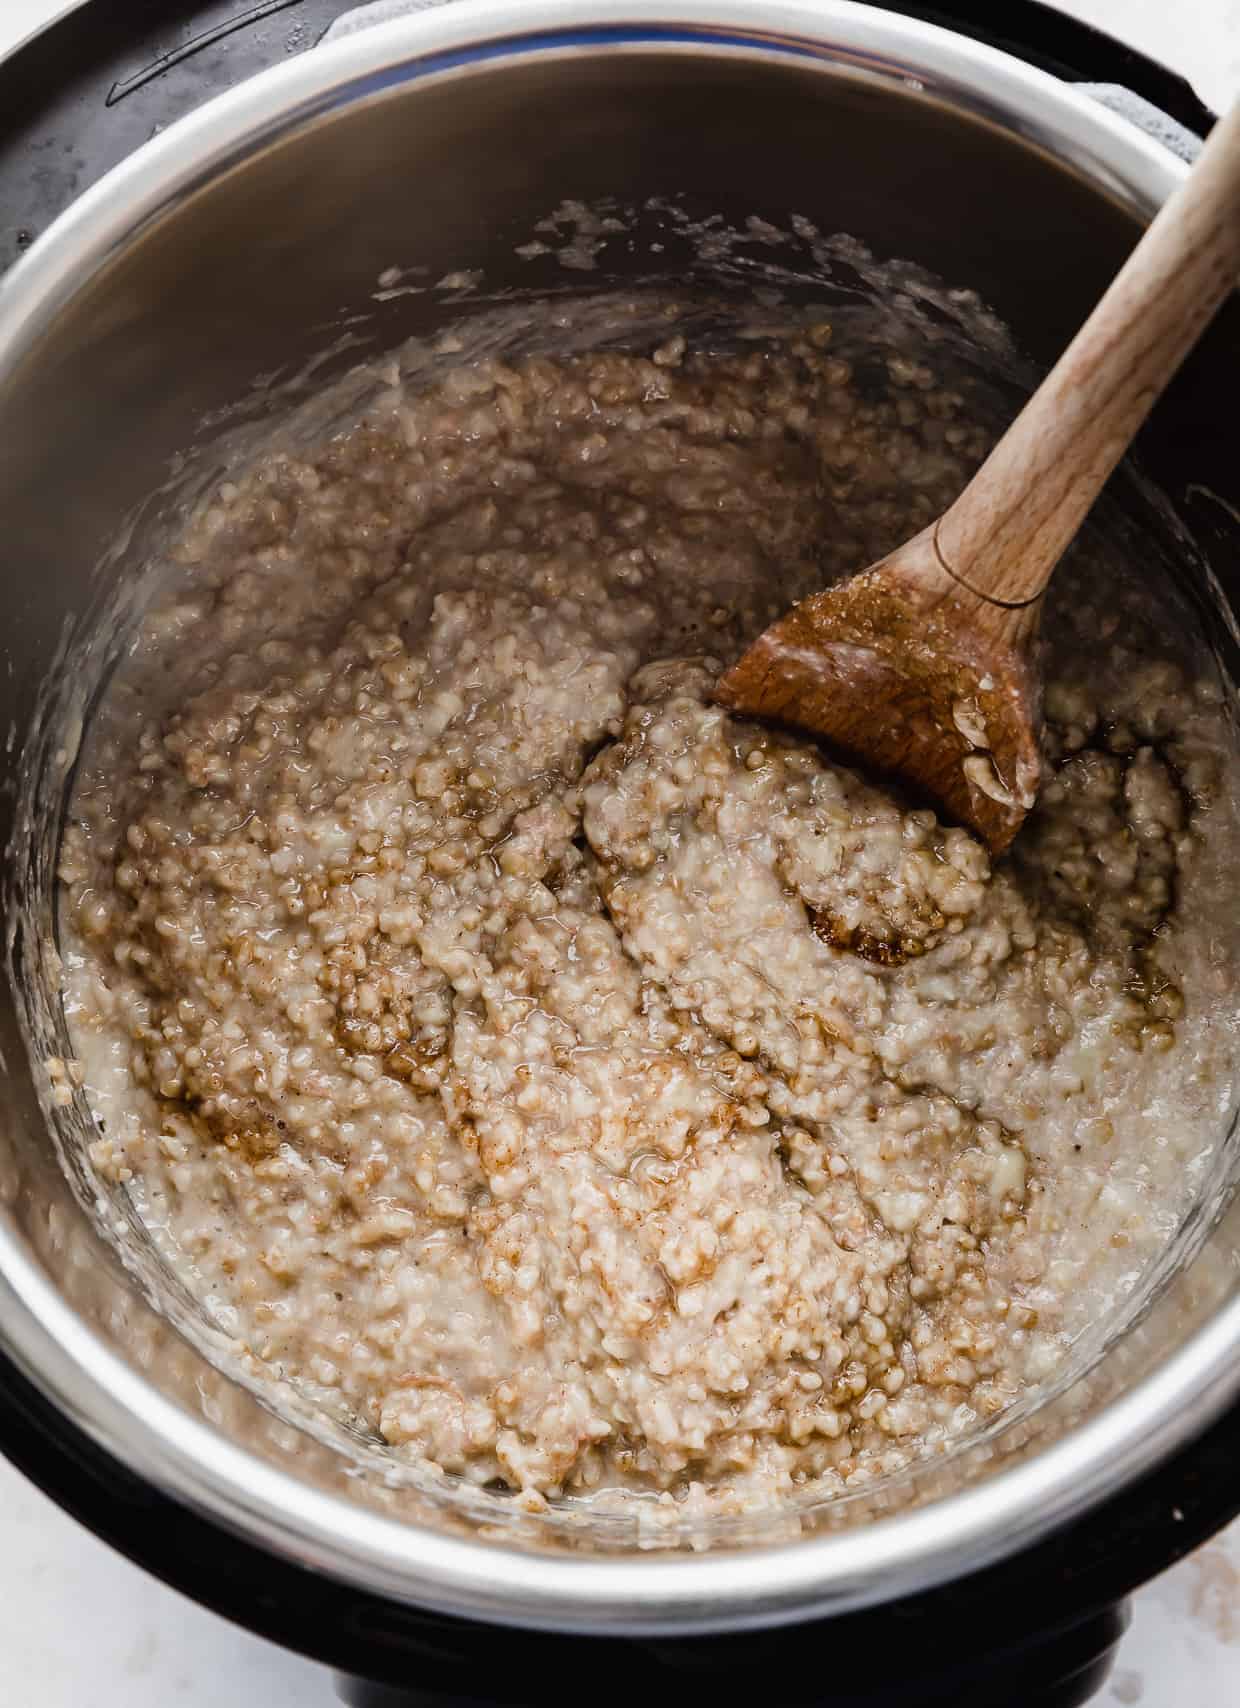 Cooked banana bread steel cut oats in an instant pot.